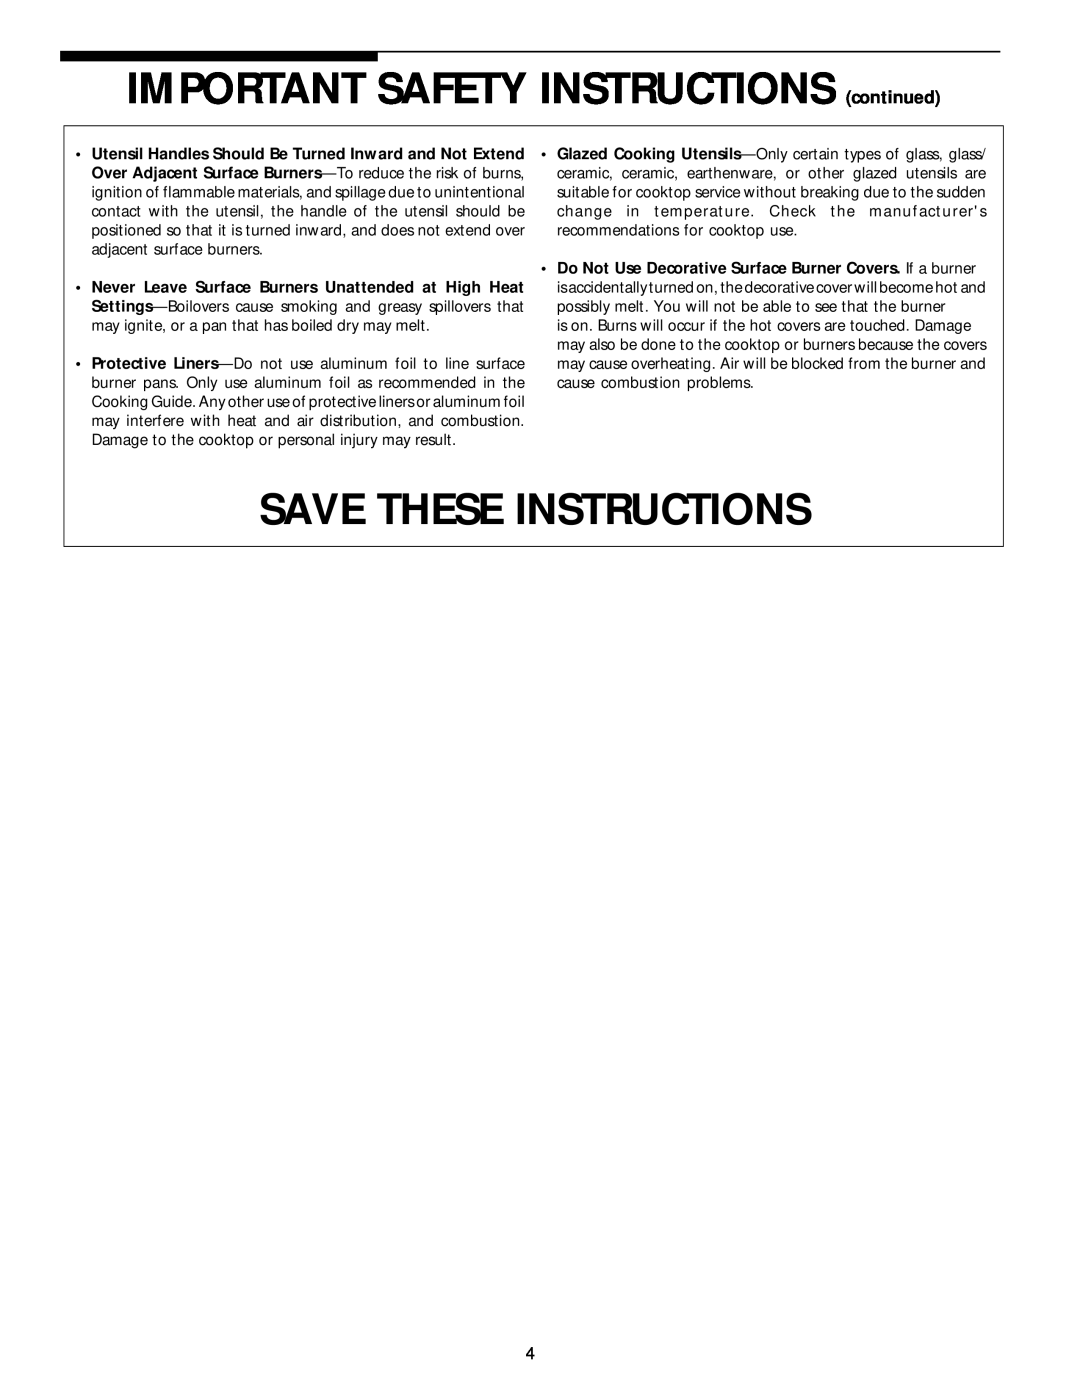 White-Westinghouse 318132200 manual IMPORTANT SAFETY INSTRUCTIONS continued, Save These Instructions 